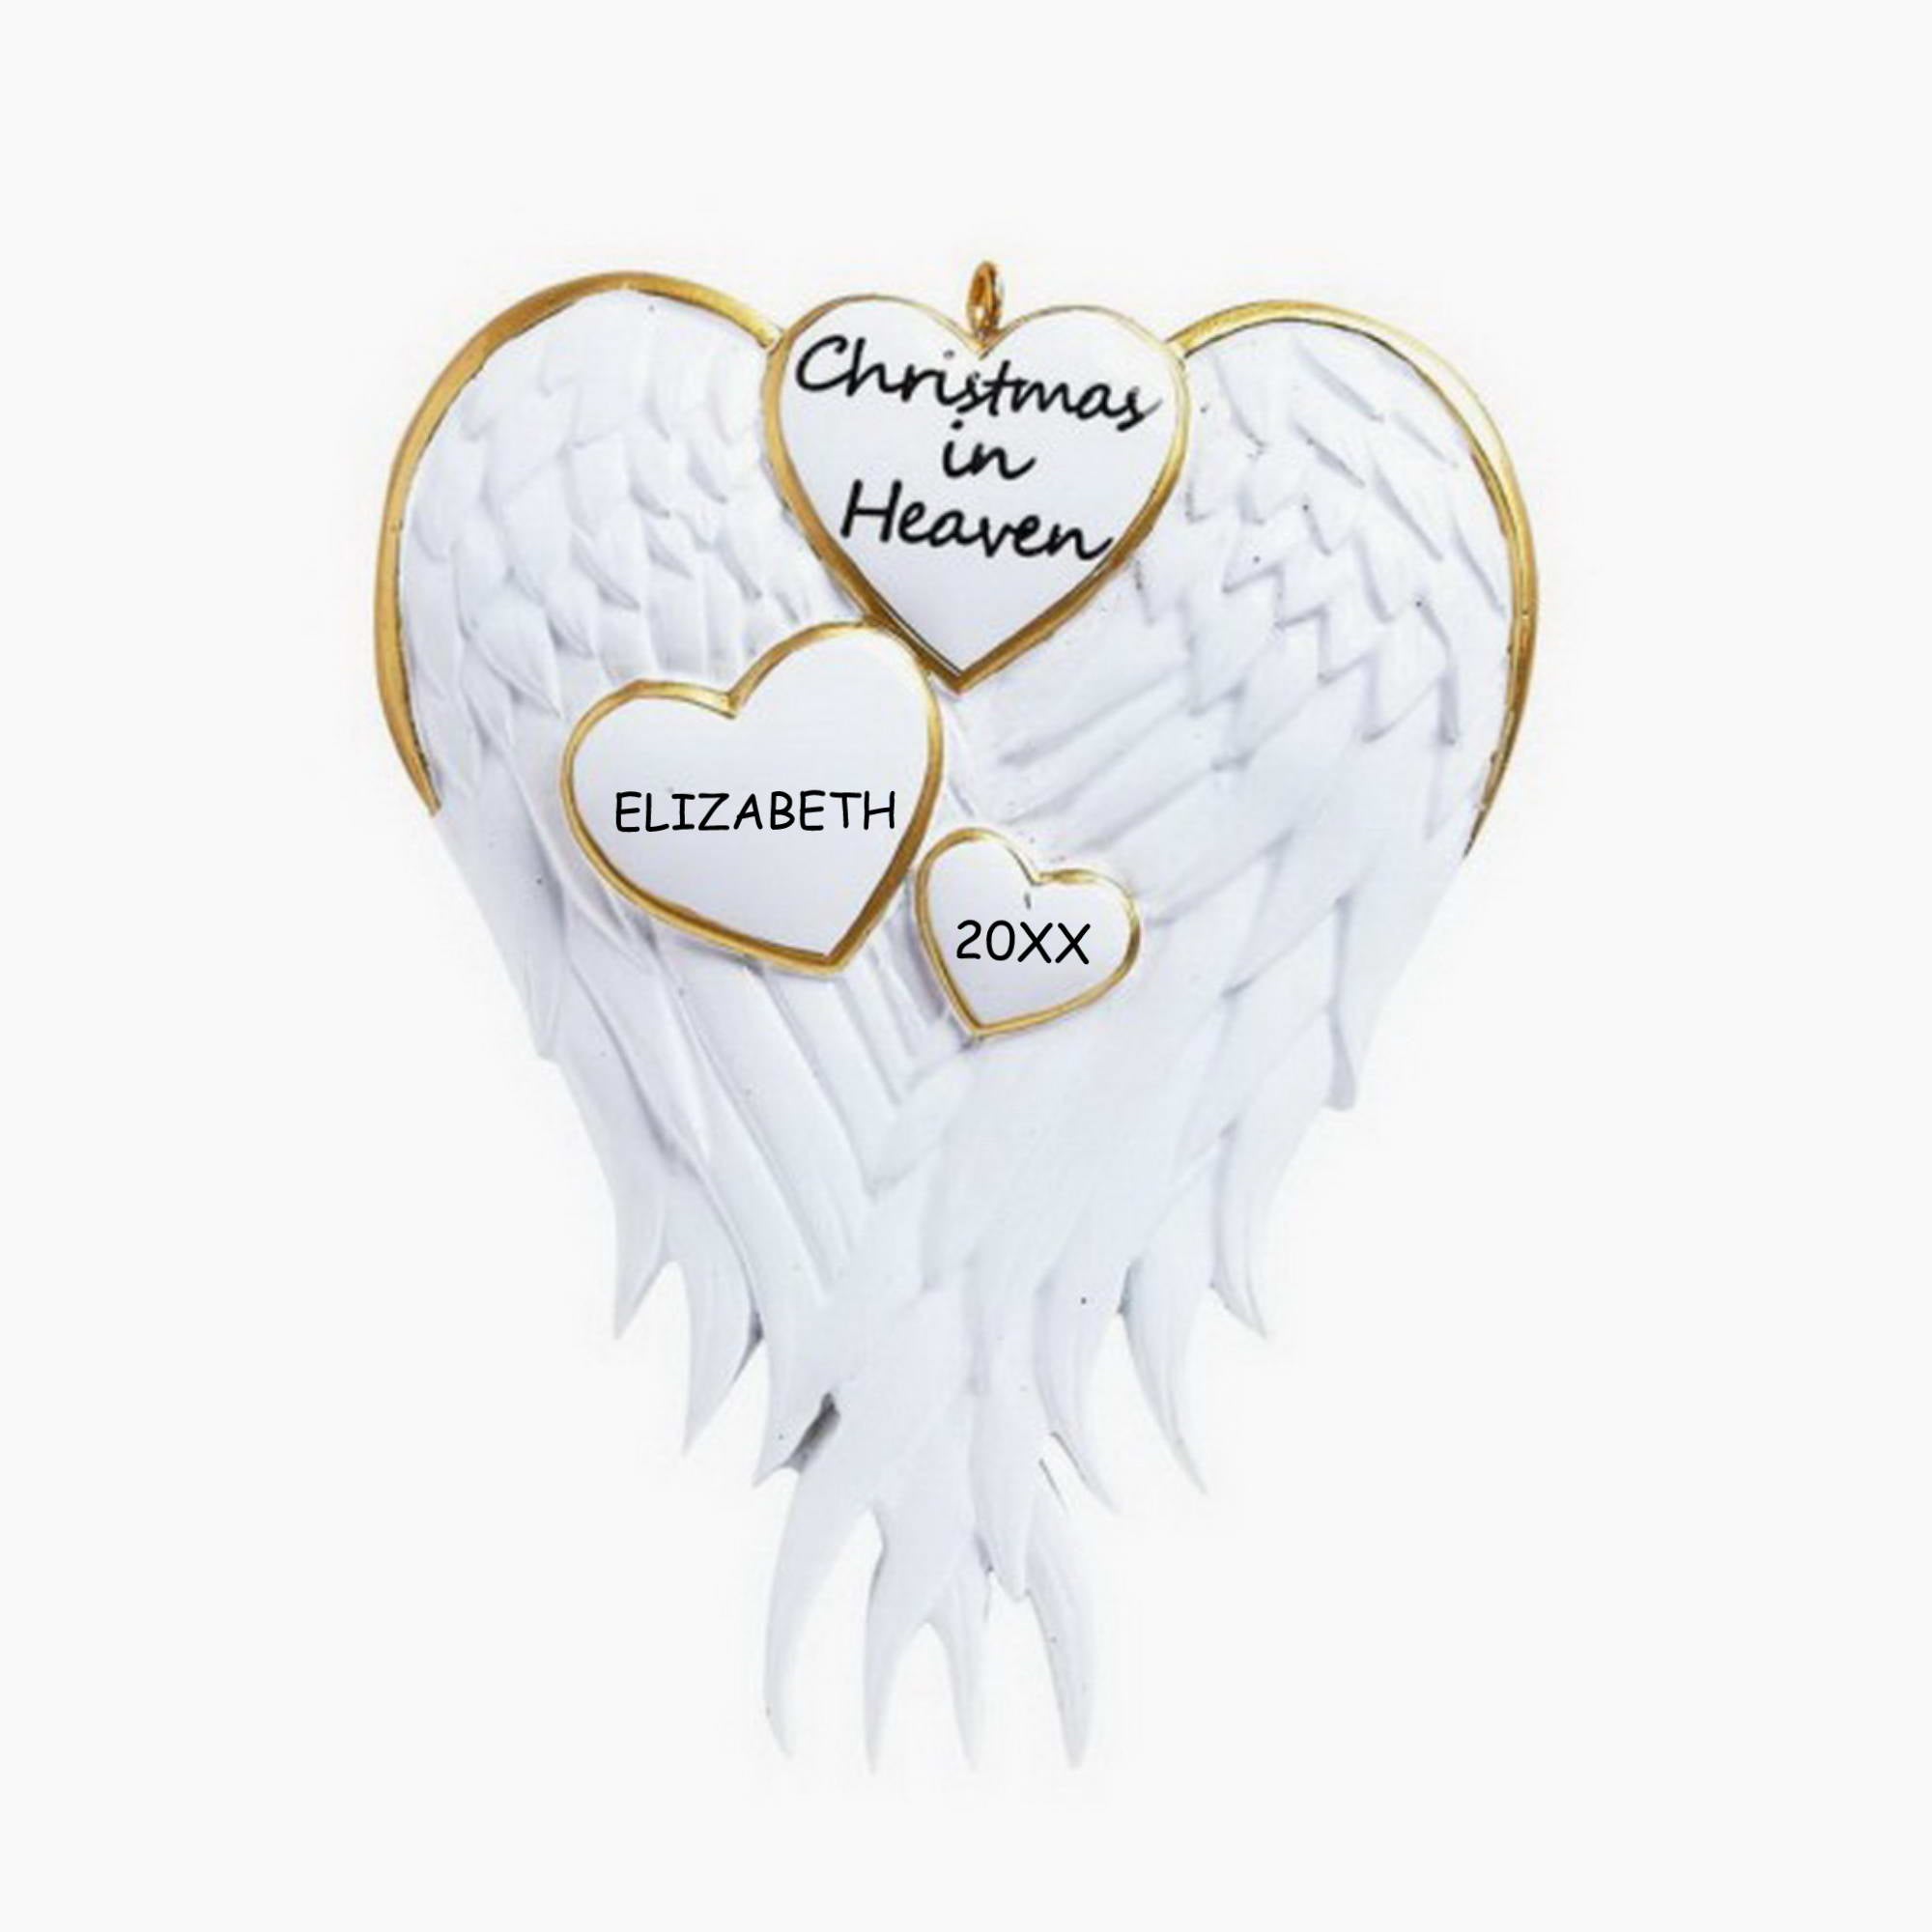 Personalized Christmas In Heaven Ornament